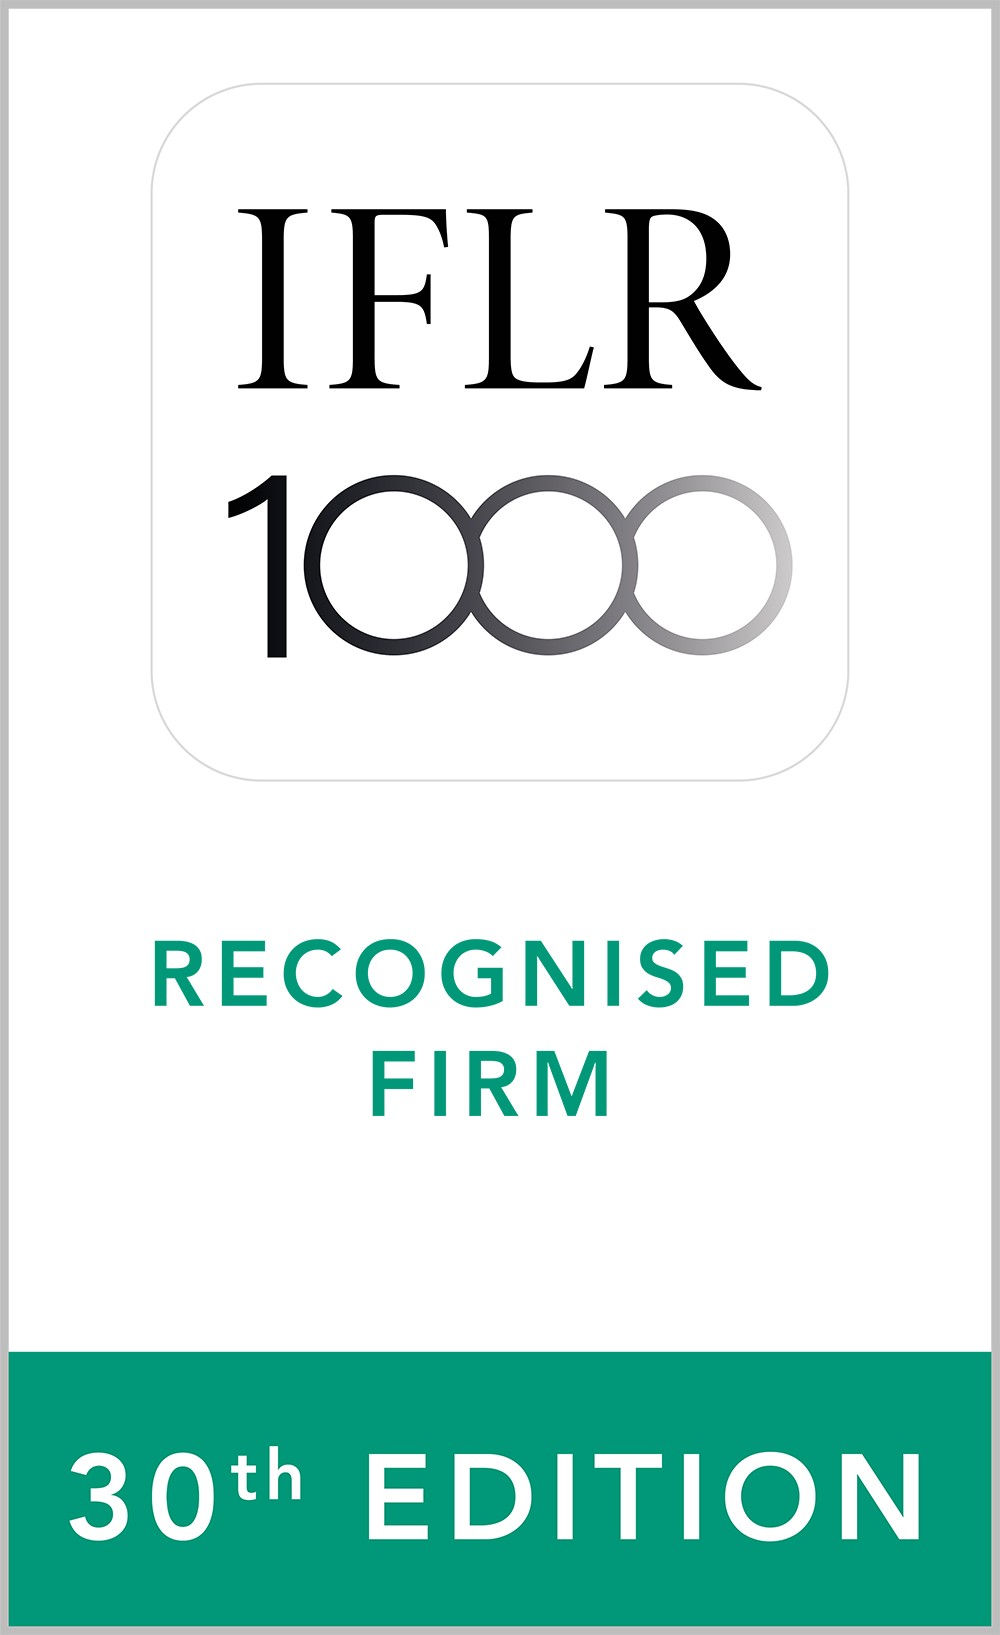 Ranked "Notable" Firm by IFLR1000, 2021 edition